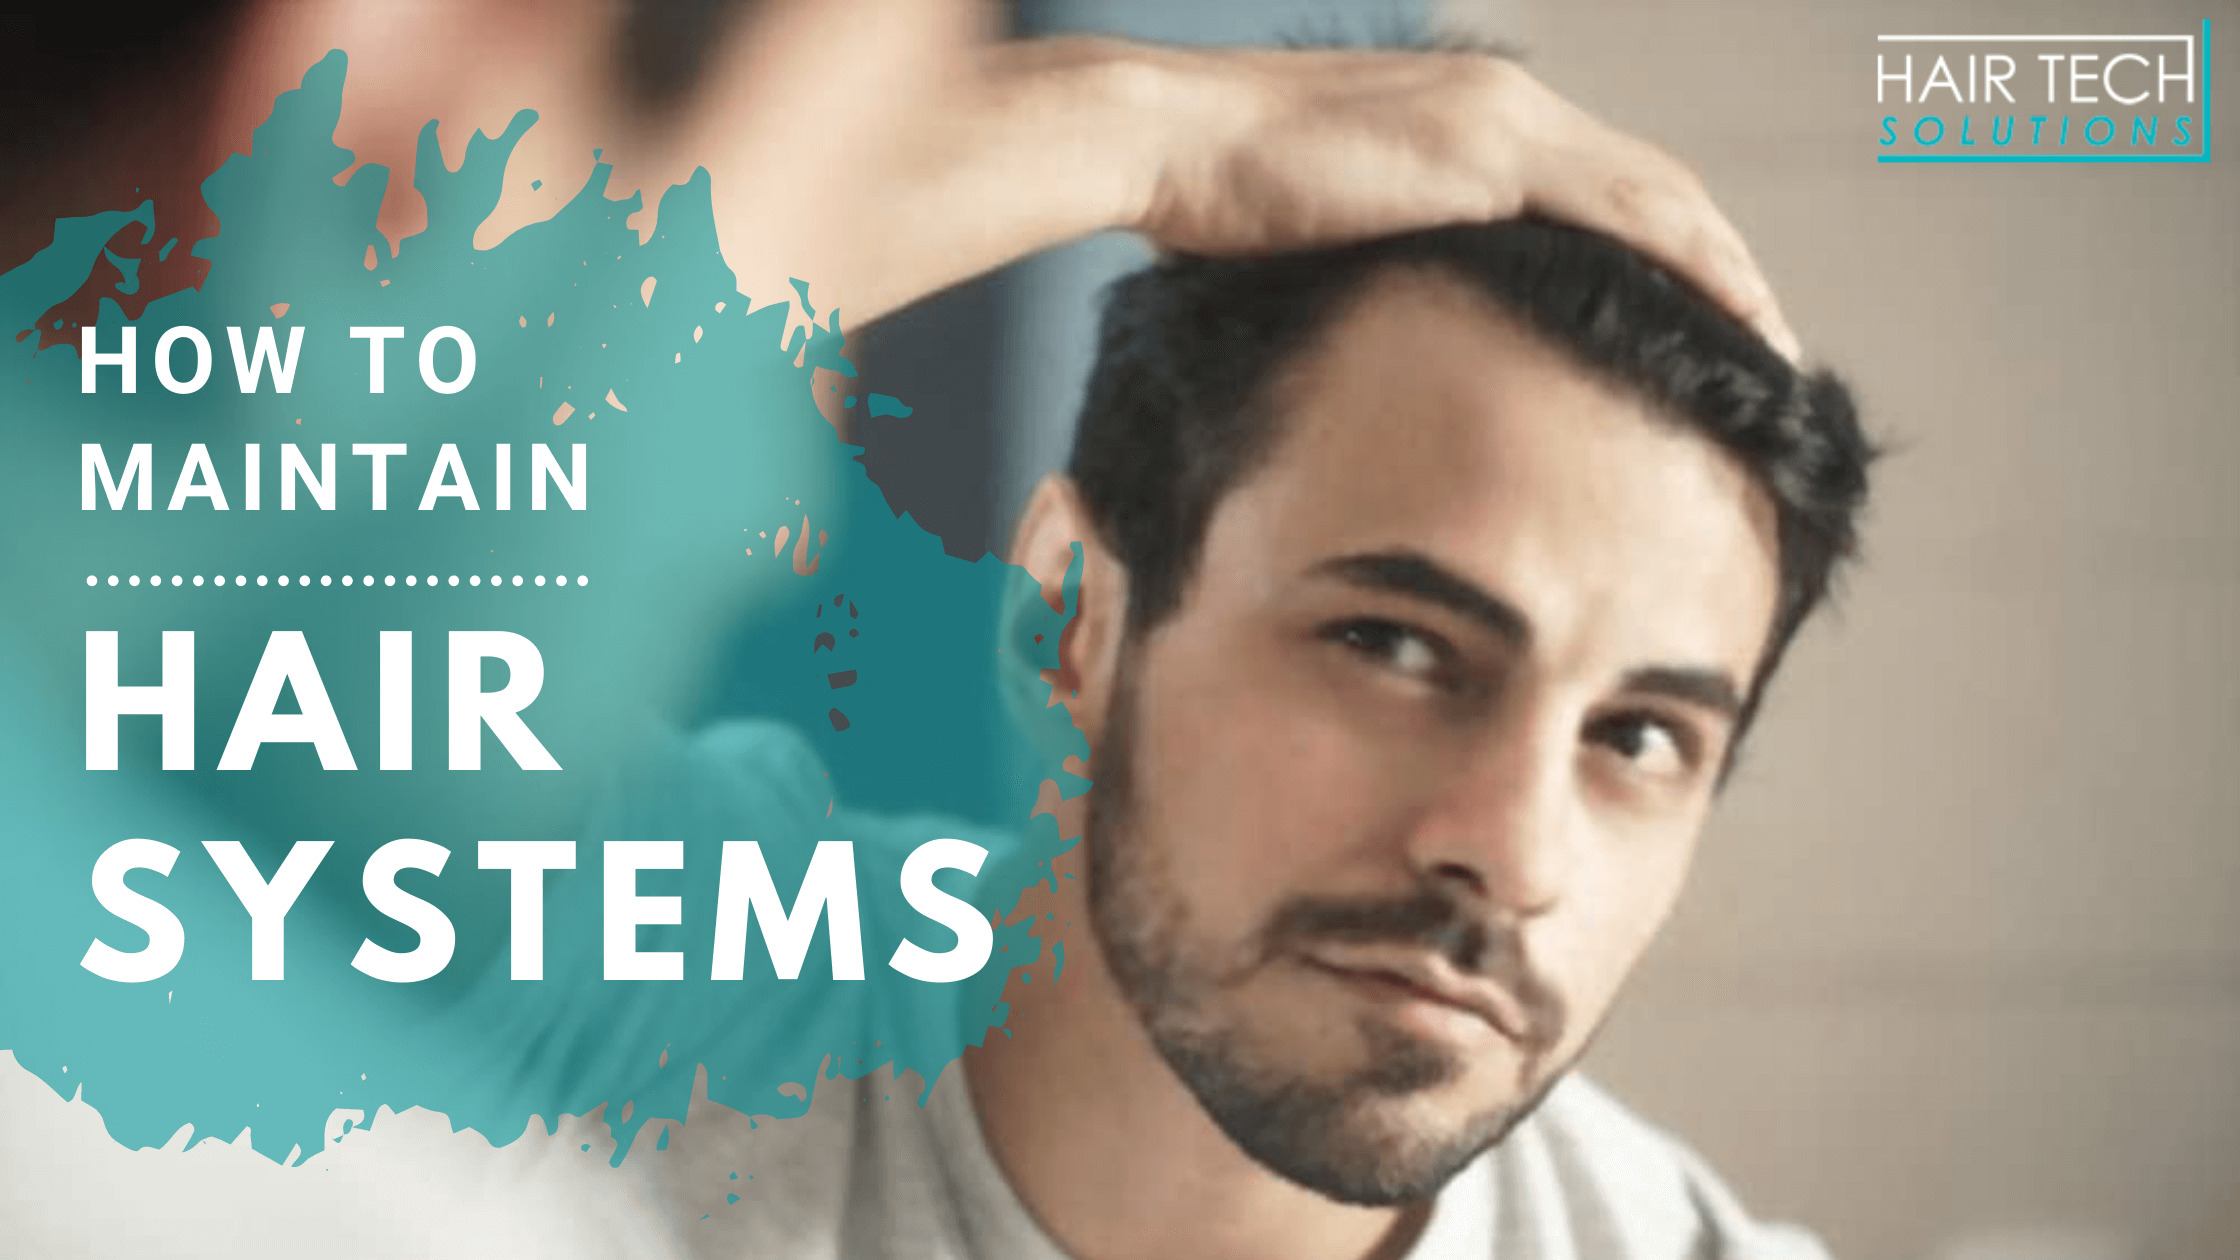 6 Myths About Non Surgical Hair Replacement Systems